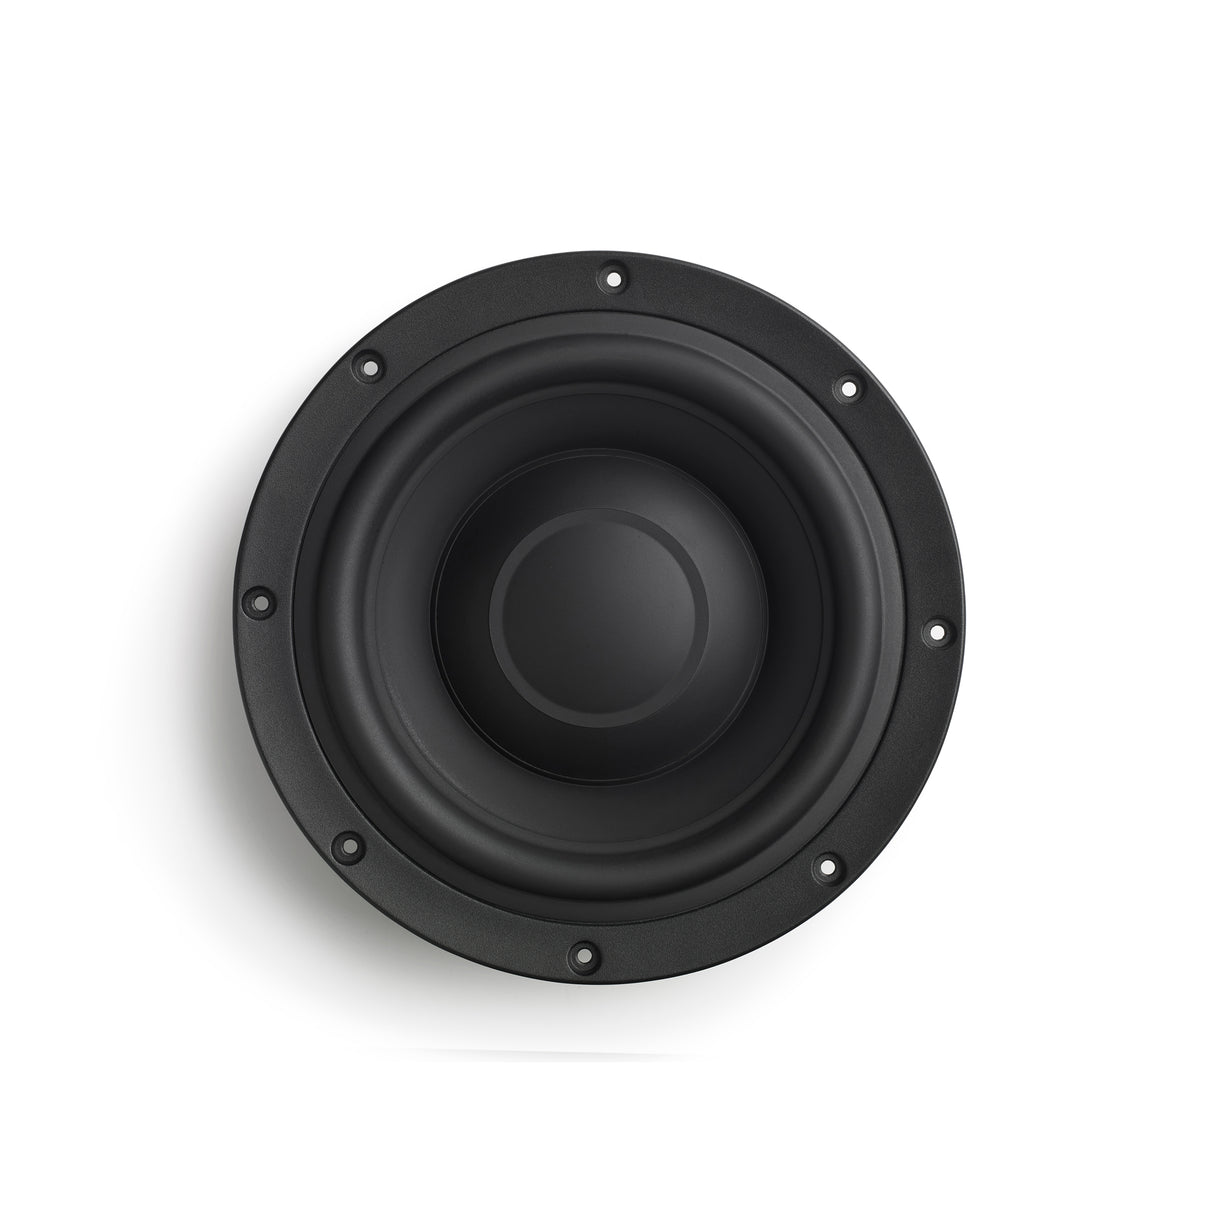 Meridian DSW600 In-Wall Digital Active Subwoofer